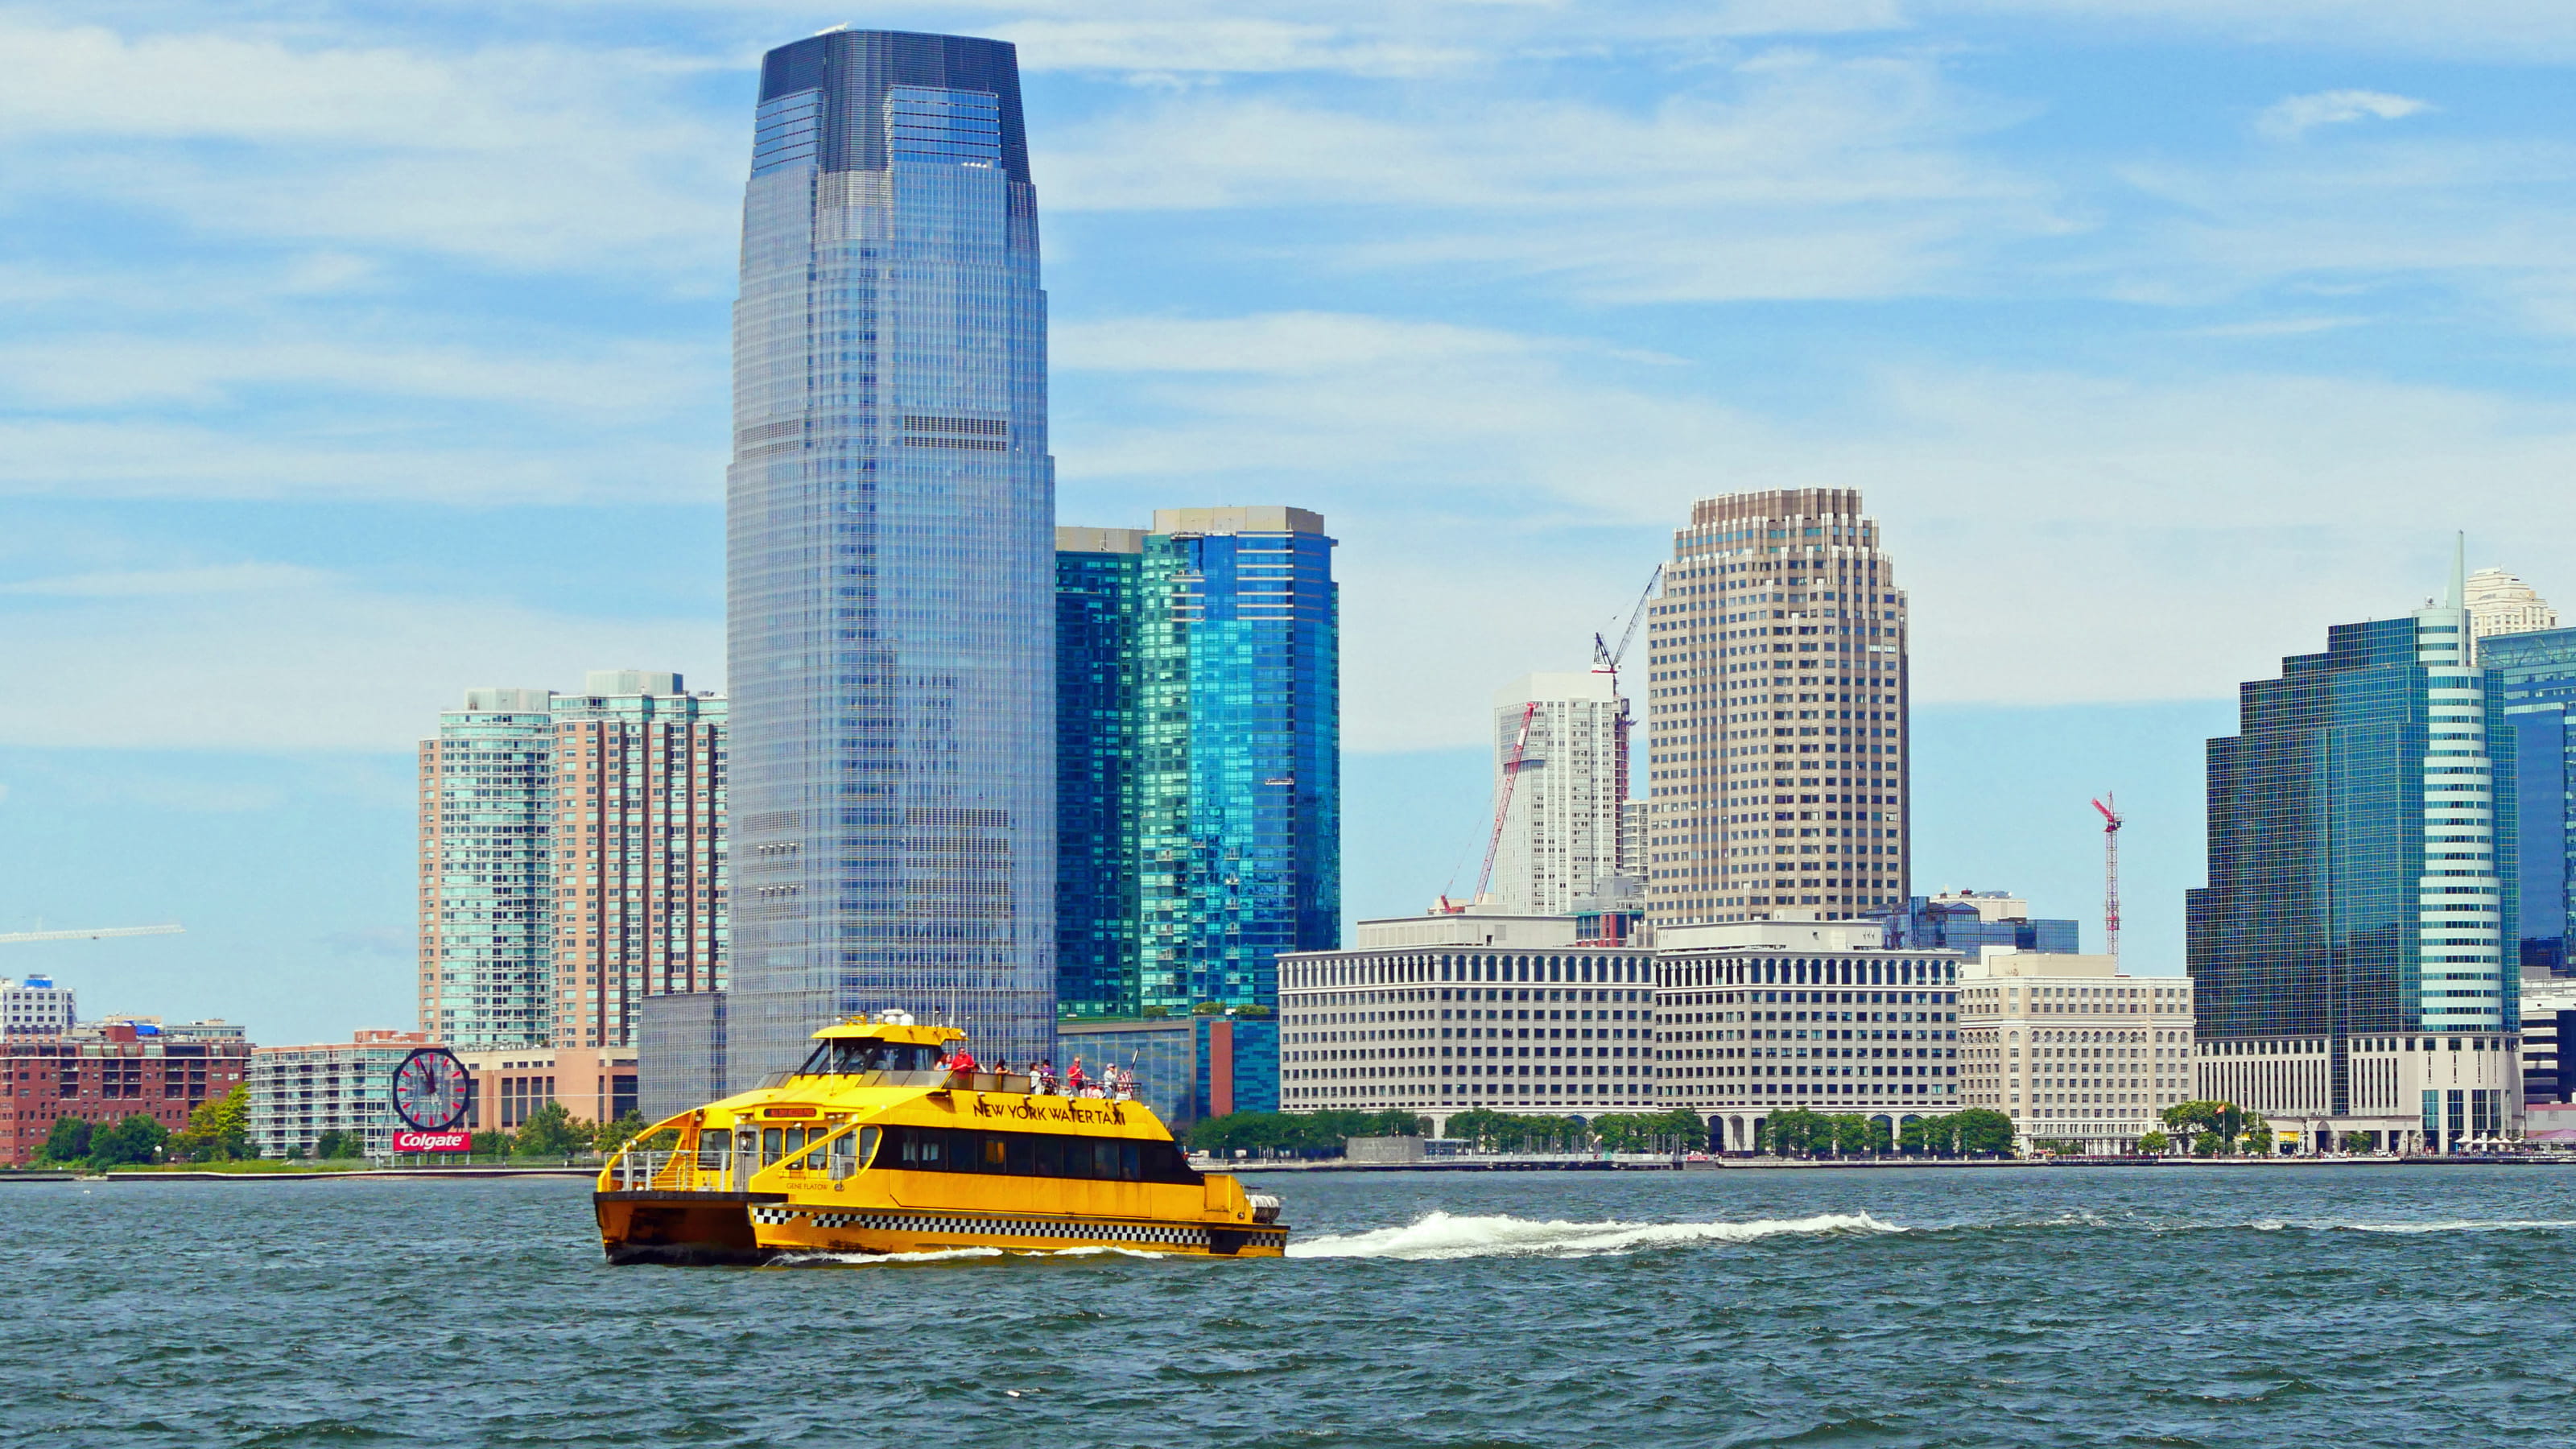 A yellow New York Water Taxi cruises pass Jersry City waterfront on the Hudson River out toward New York Harbor for a siteseeing cruise.